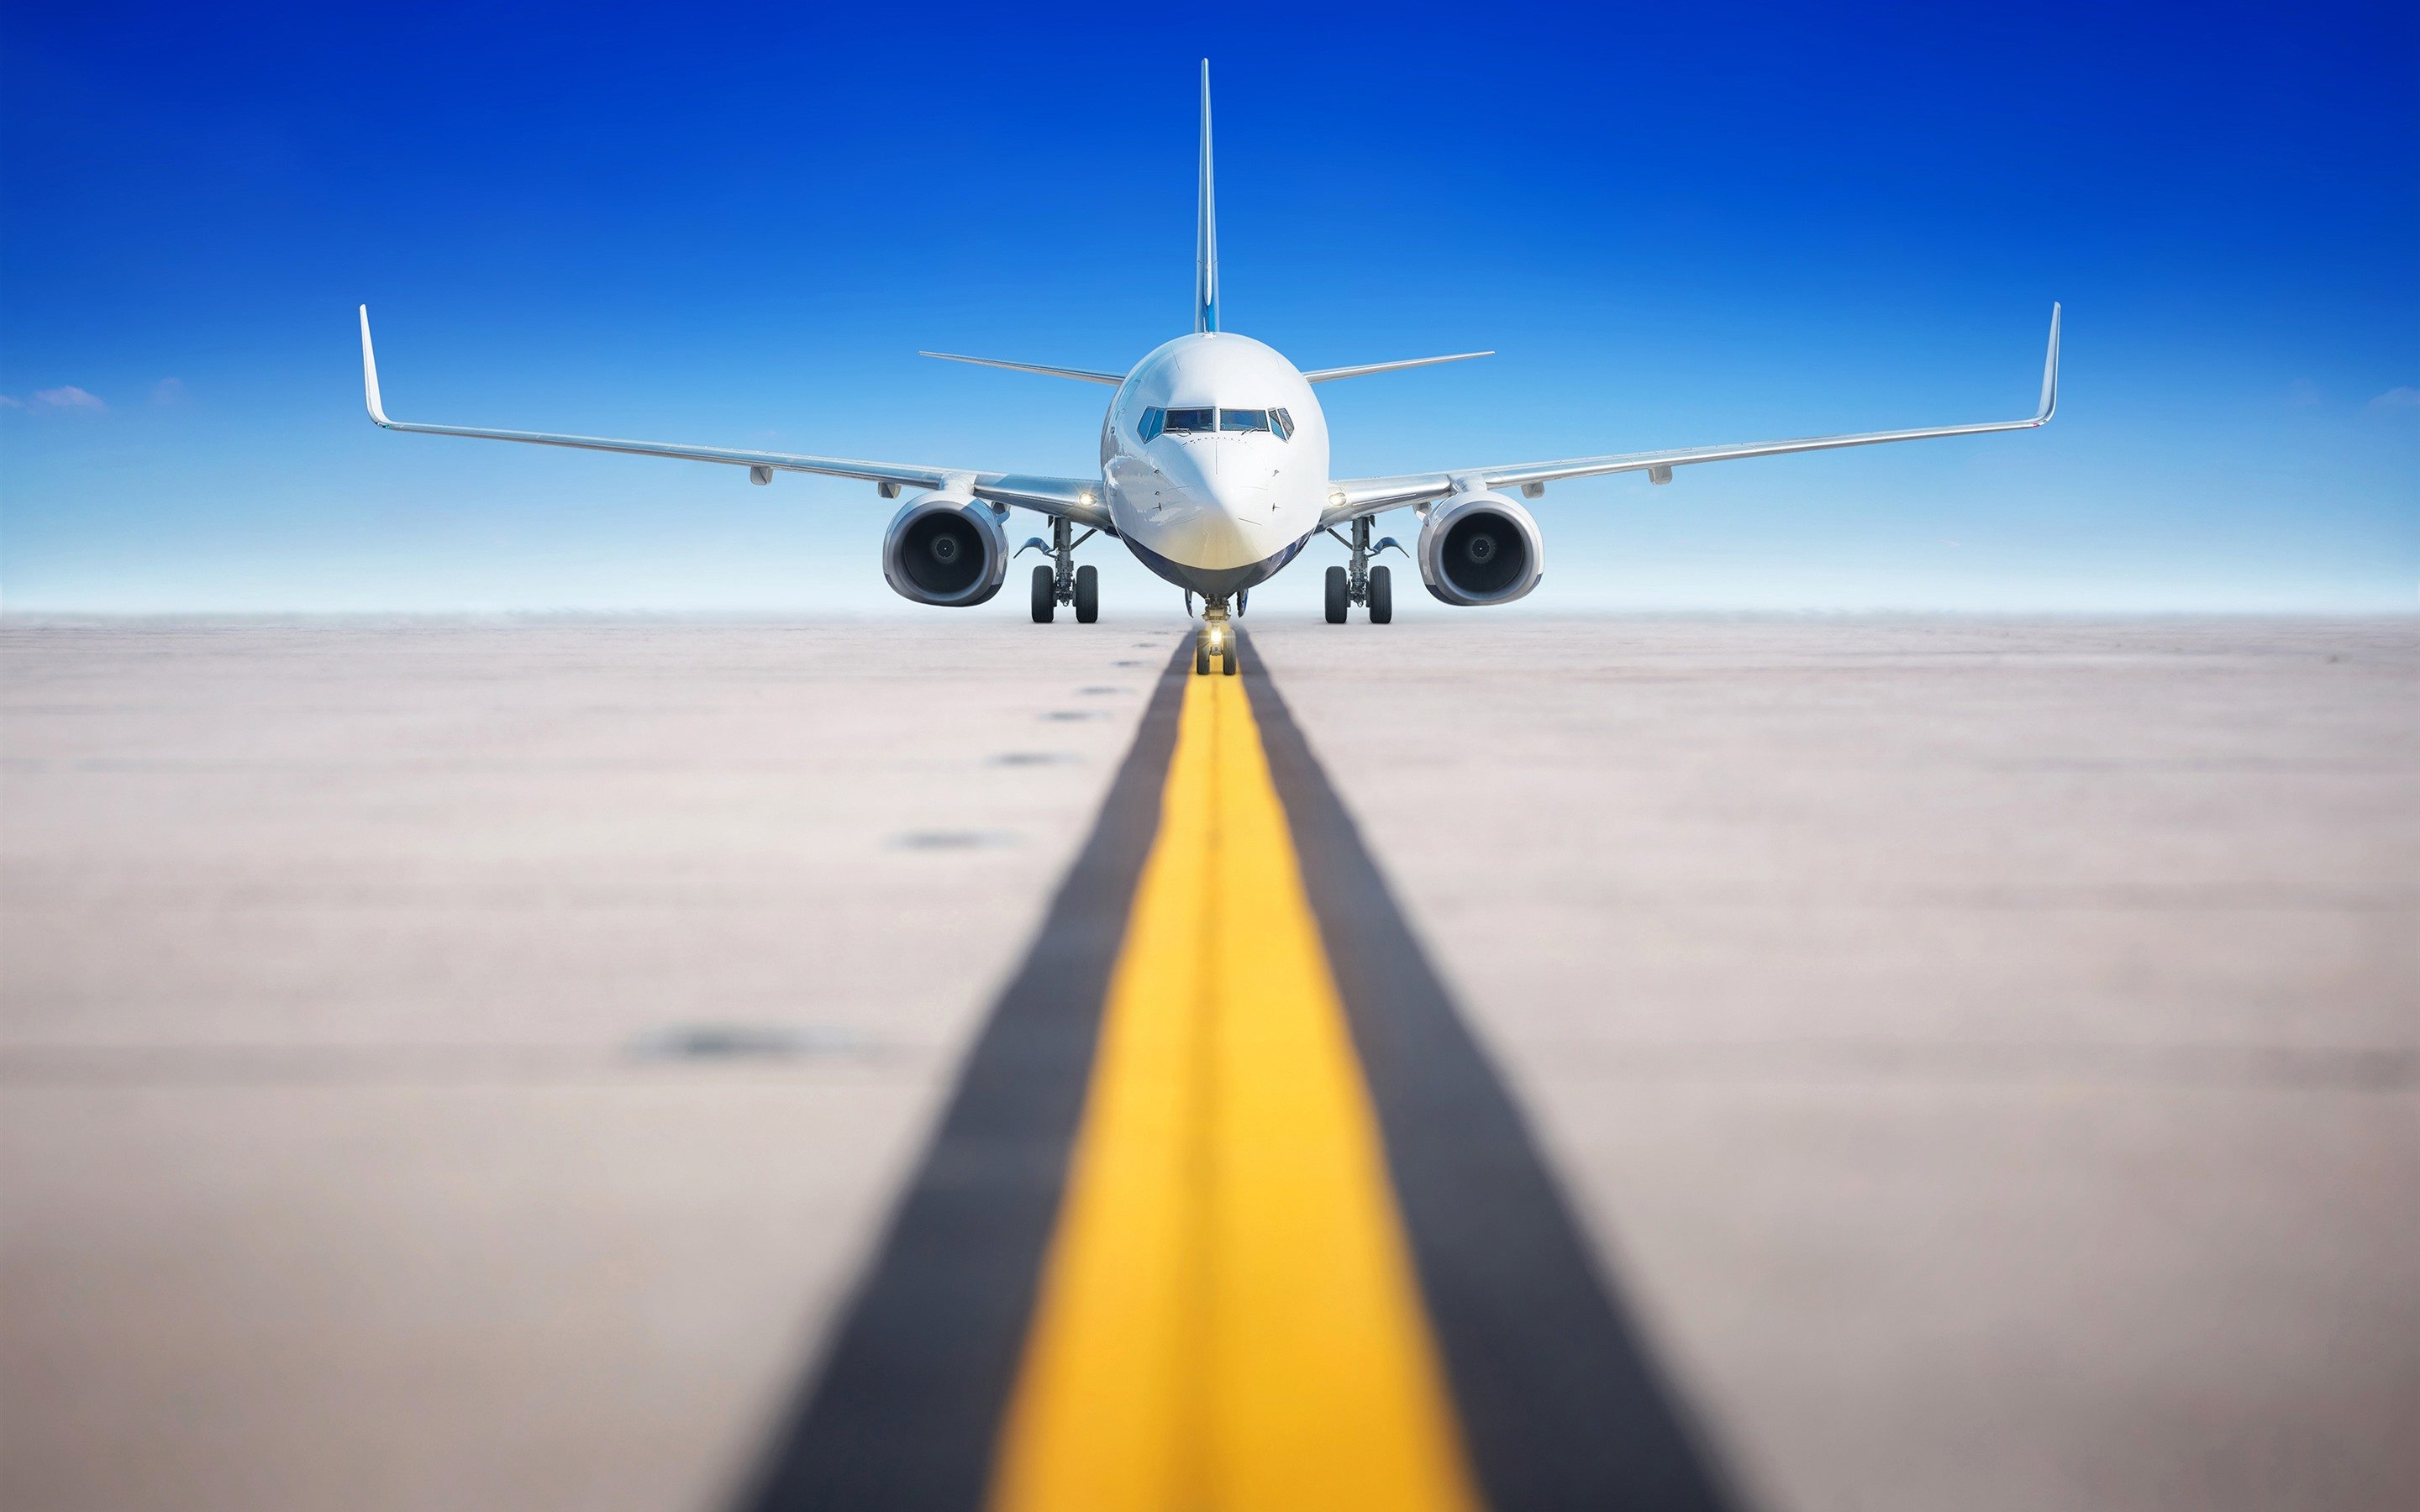 Free download Wallpaper Airport passenger airplane runway front view [2880x1800] for your Desktop, Mobile & Tablet. Explore Airplane Runway Wallpaper. Airplane Wallpaper, Airplane Wallpaper, Airplane Wallpaper HD